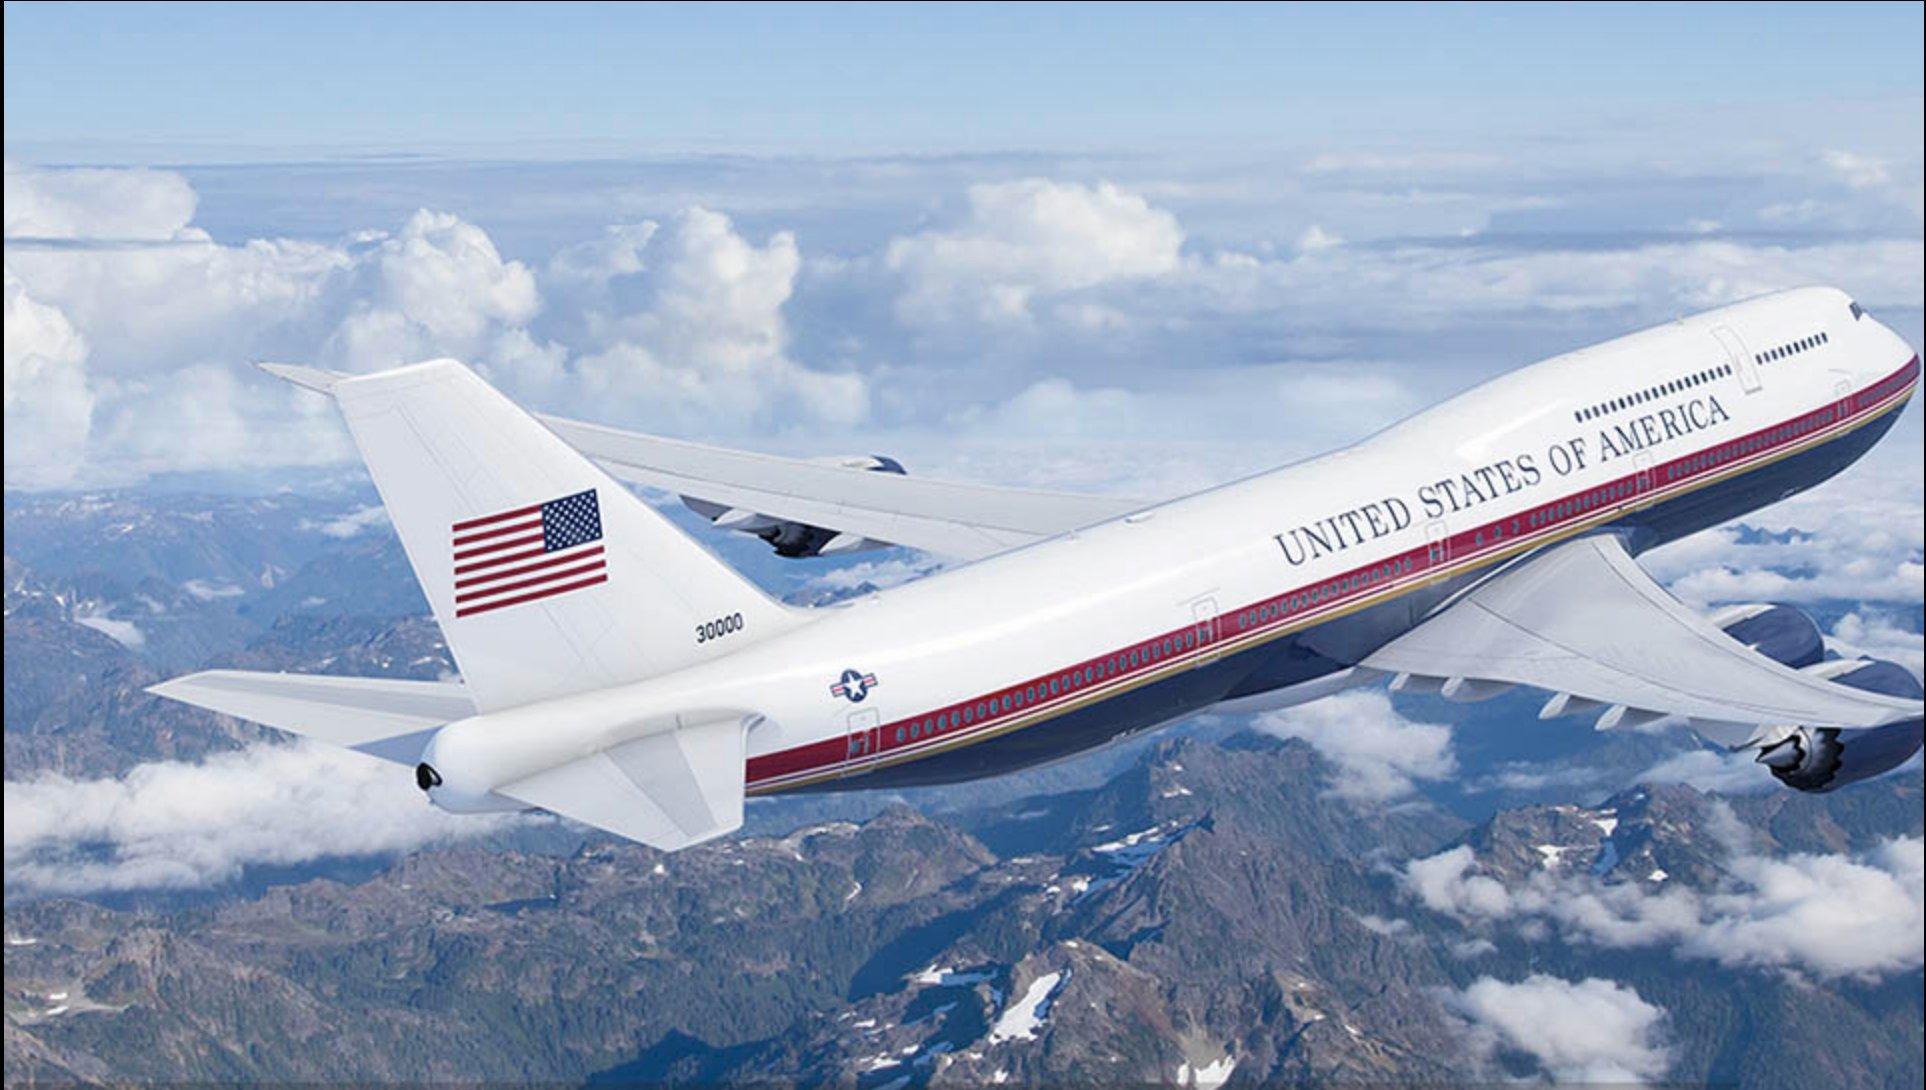 A  Darker Livery  proposed  by  former  President  Donald  Trump  for  the  'Air Force  One'  to  be  scrapped ,  would  have  created  engine  heat  issues  !